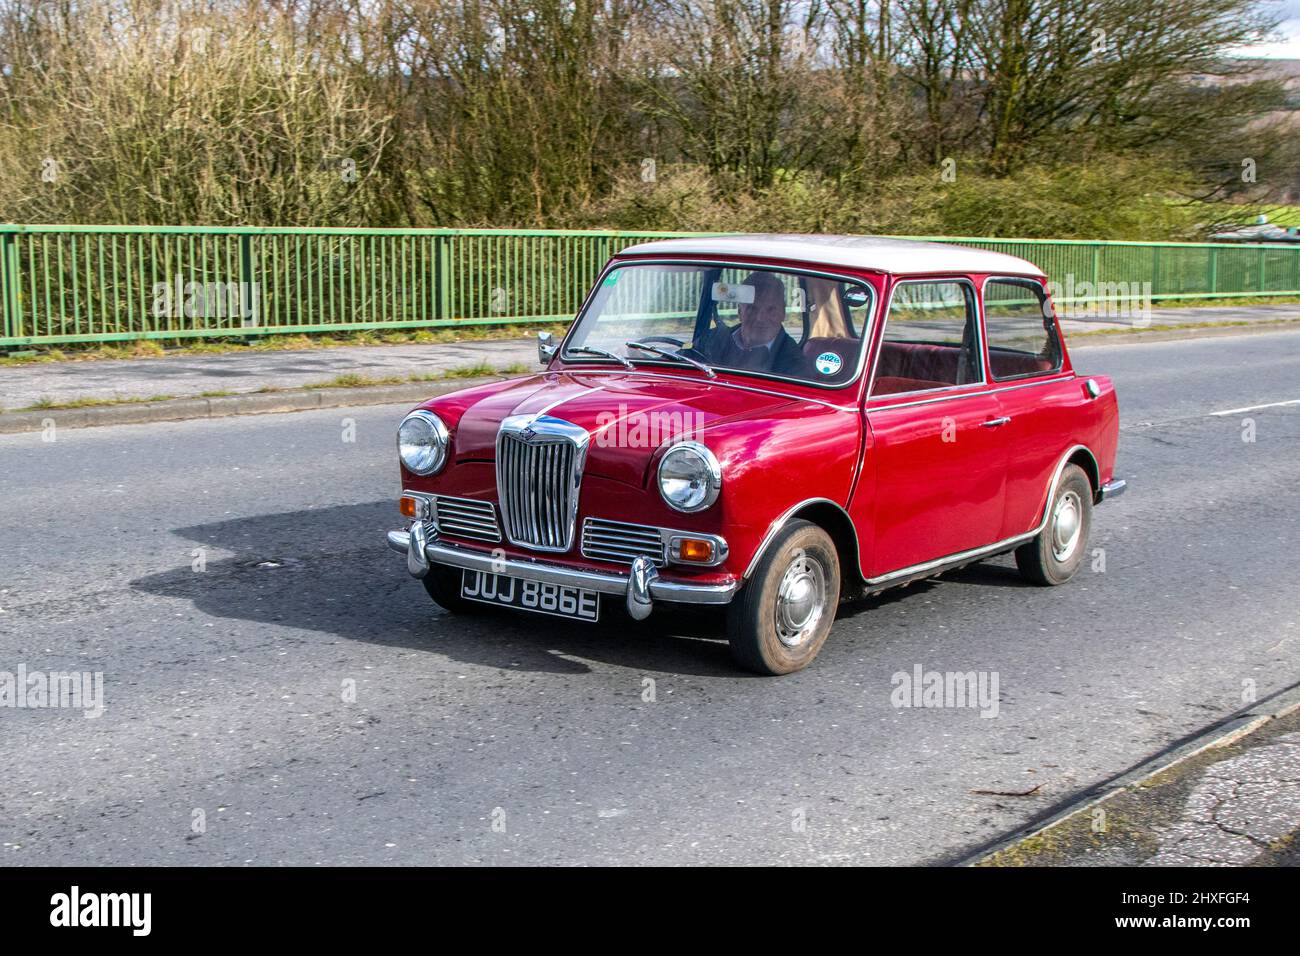 1967 605 red  Riley Elf Mk.III 998cc petrol 2dr saloon; Vehicular traffic, moving vehicles, cars, vehicle driving on UK roads, motors, motoring on the UK road network near Manchester. Stock Photo